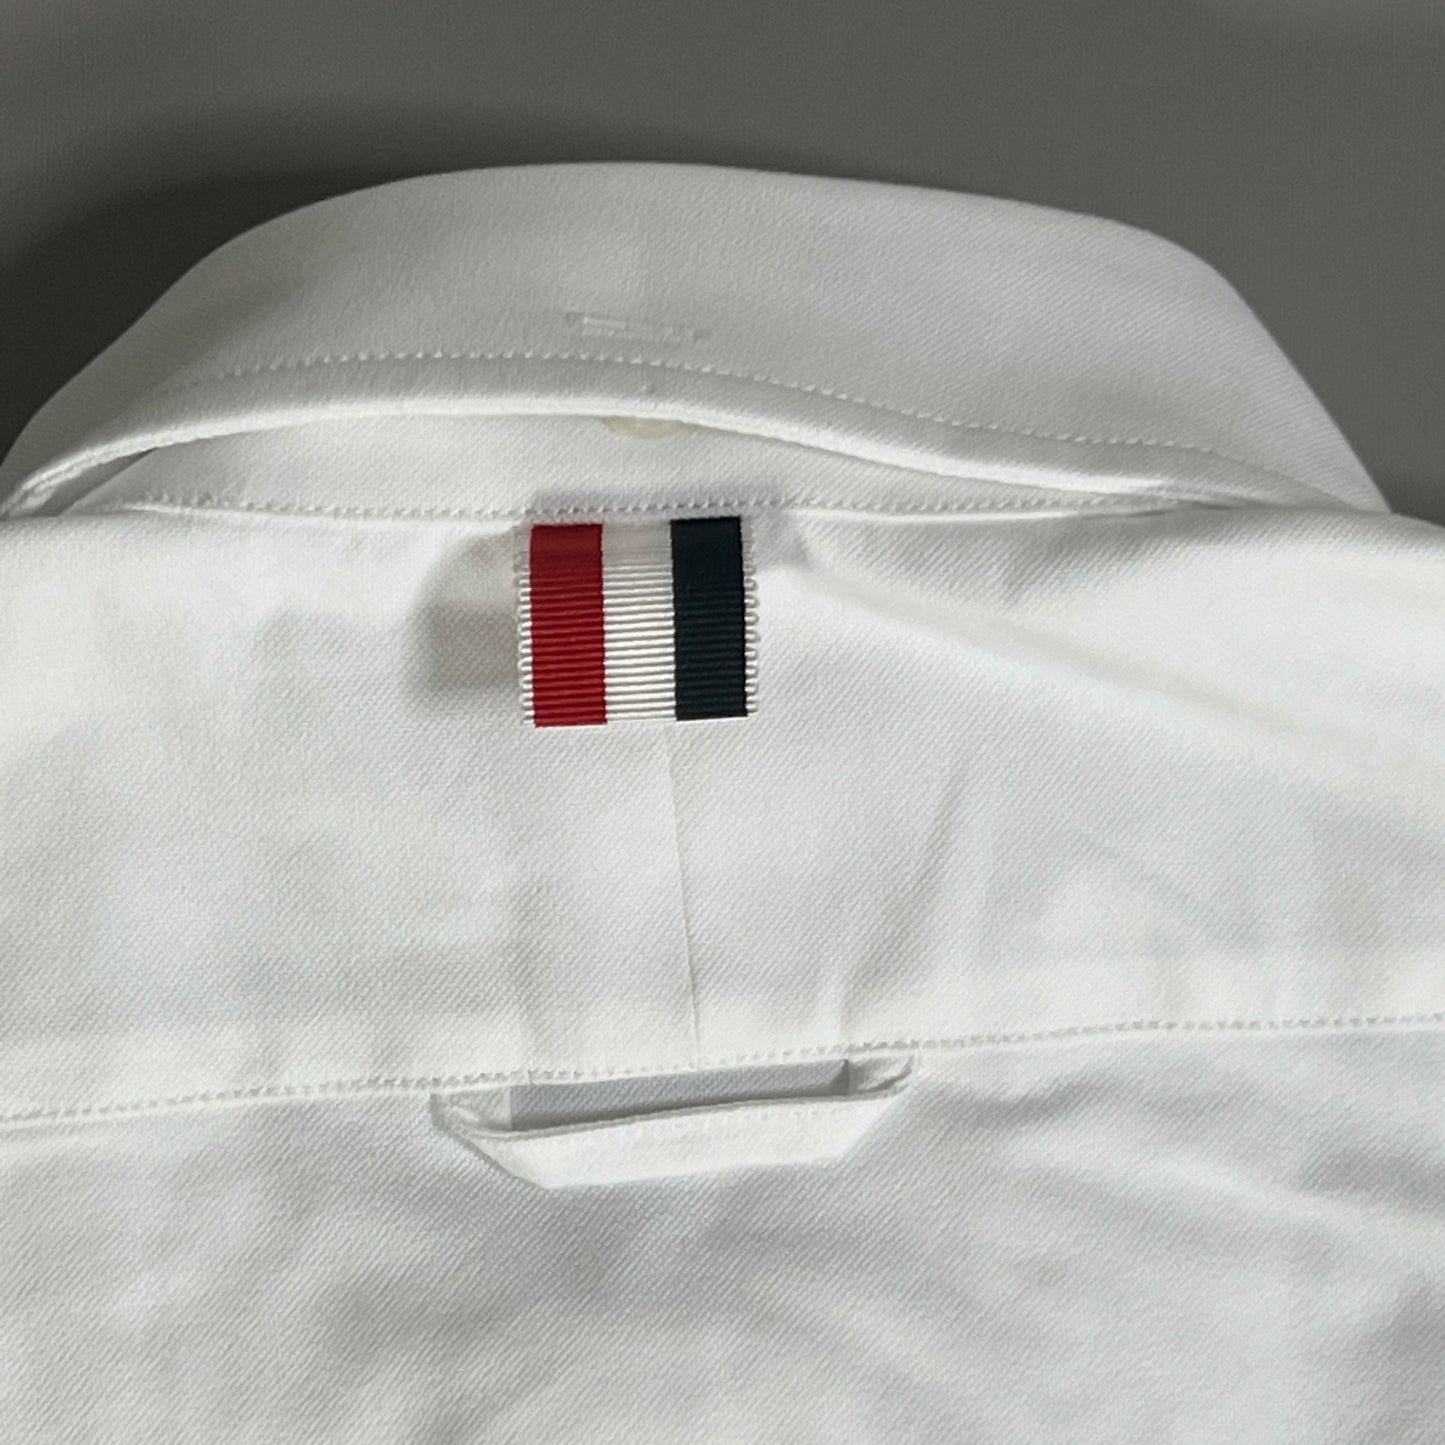 THOM BROWNE Elastic Stripe Seamed Classic Point Collar Button Down LS Shirt Oxford White Size 4 (NEW)